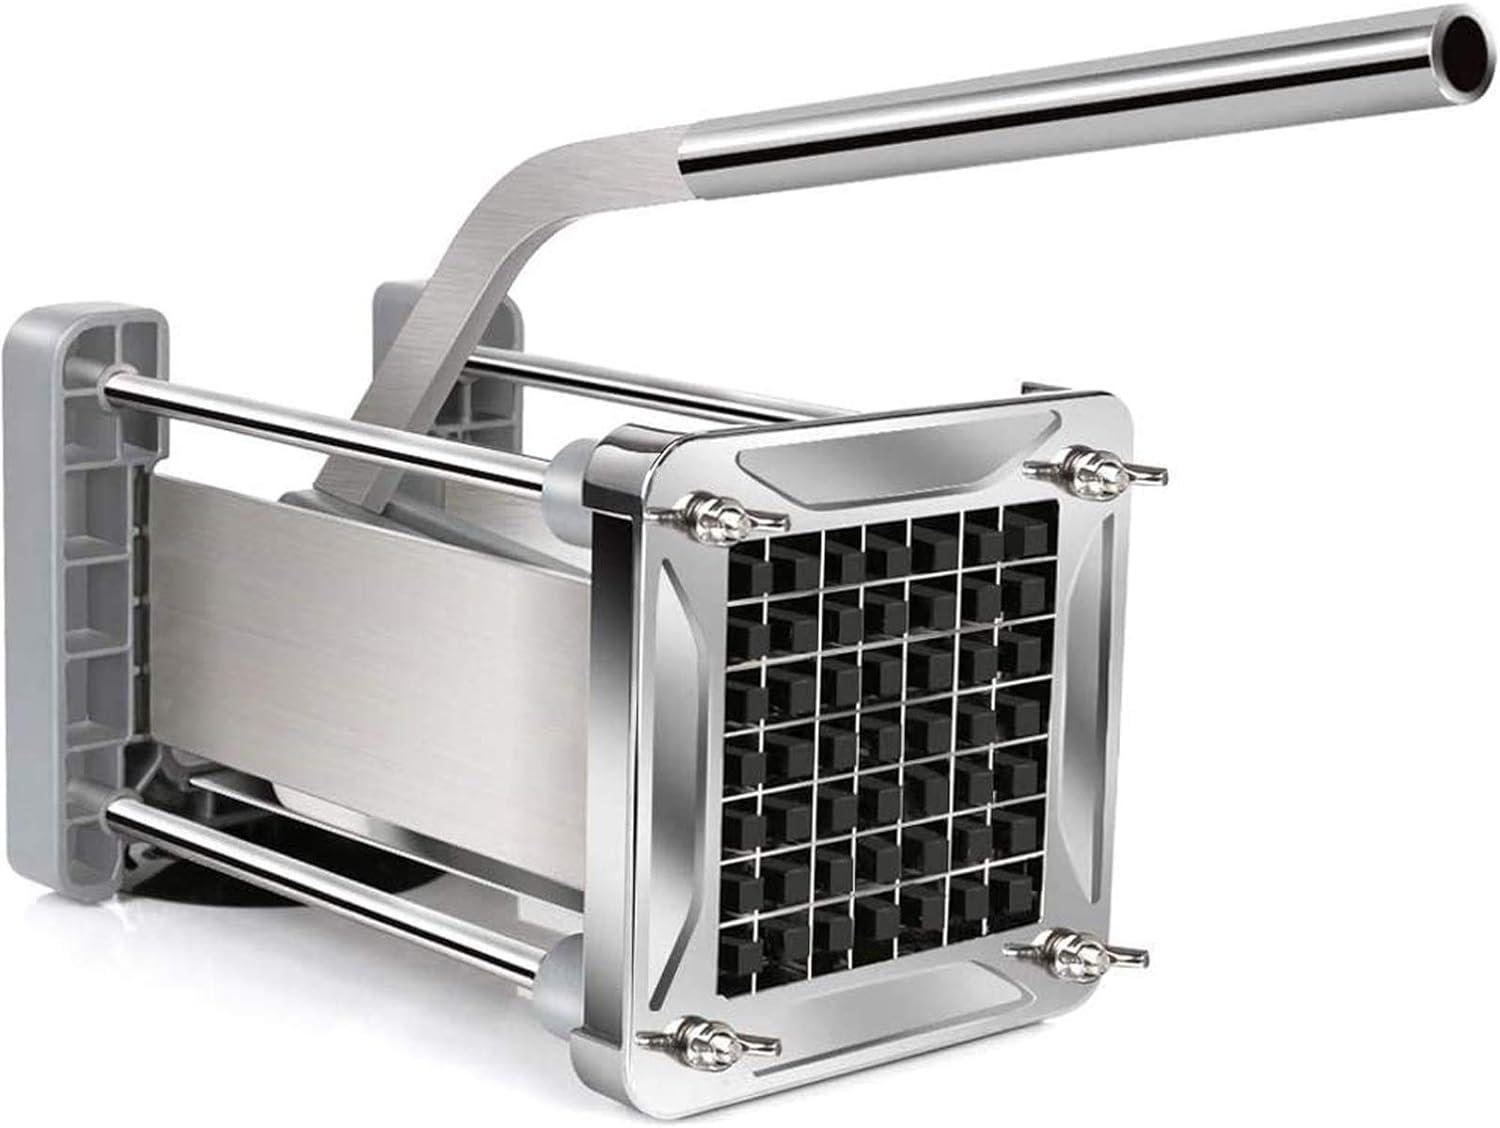 Sopito Professional Stainless Steel Potato Cutter for $39.99 Shipped